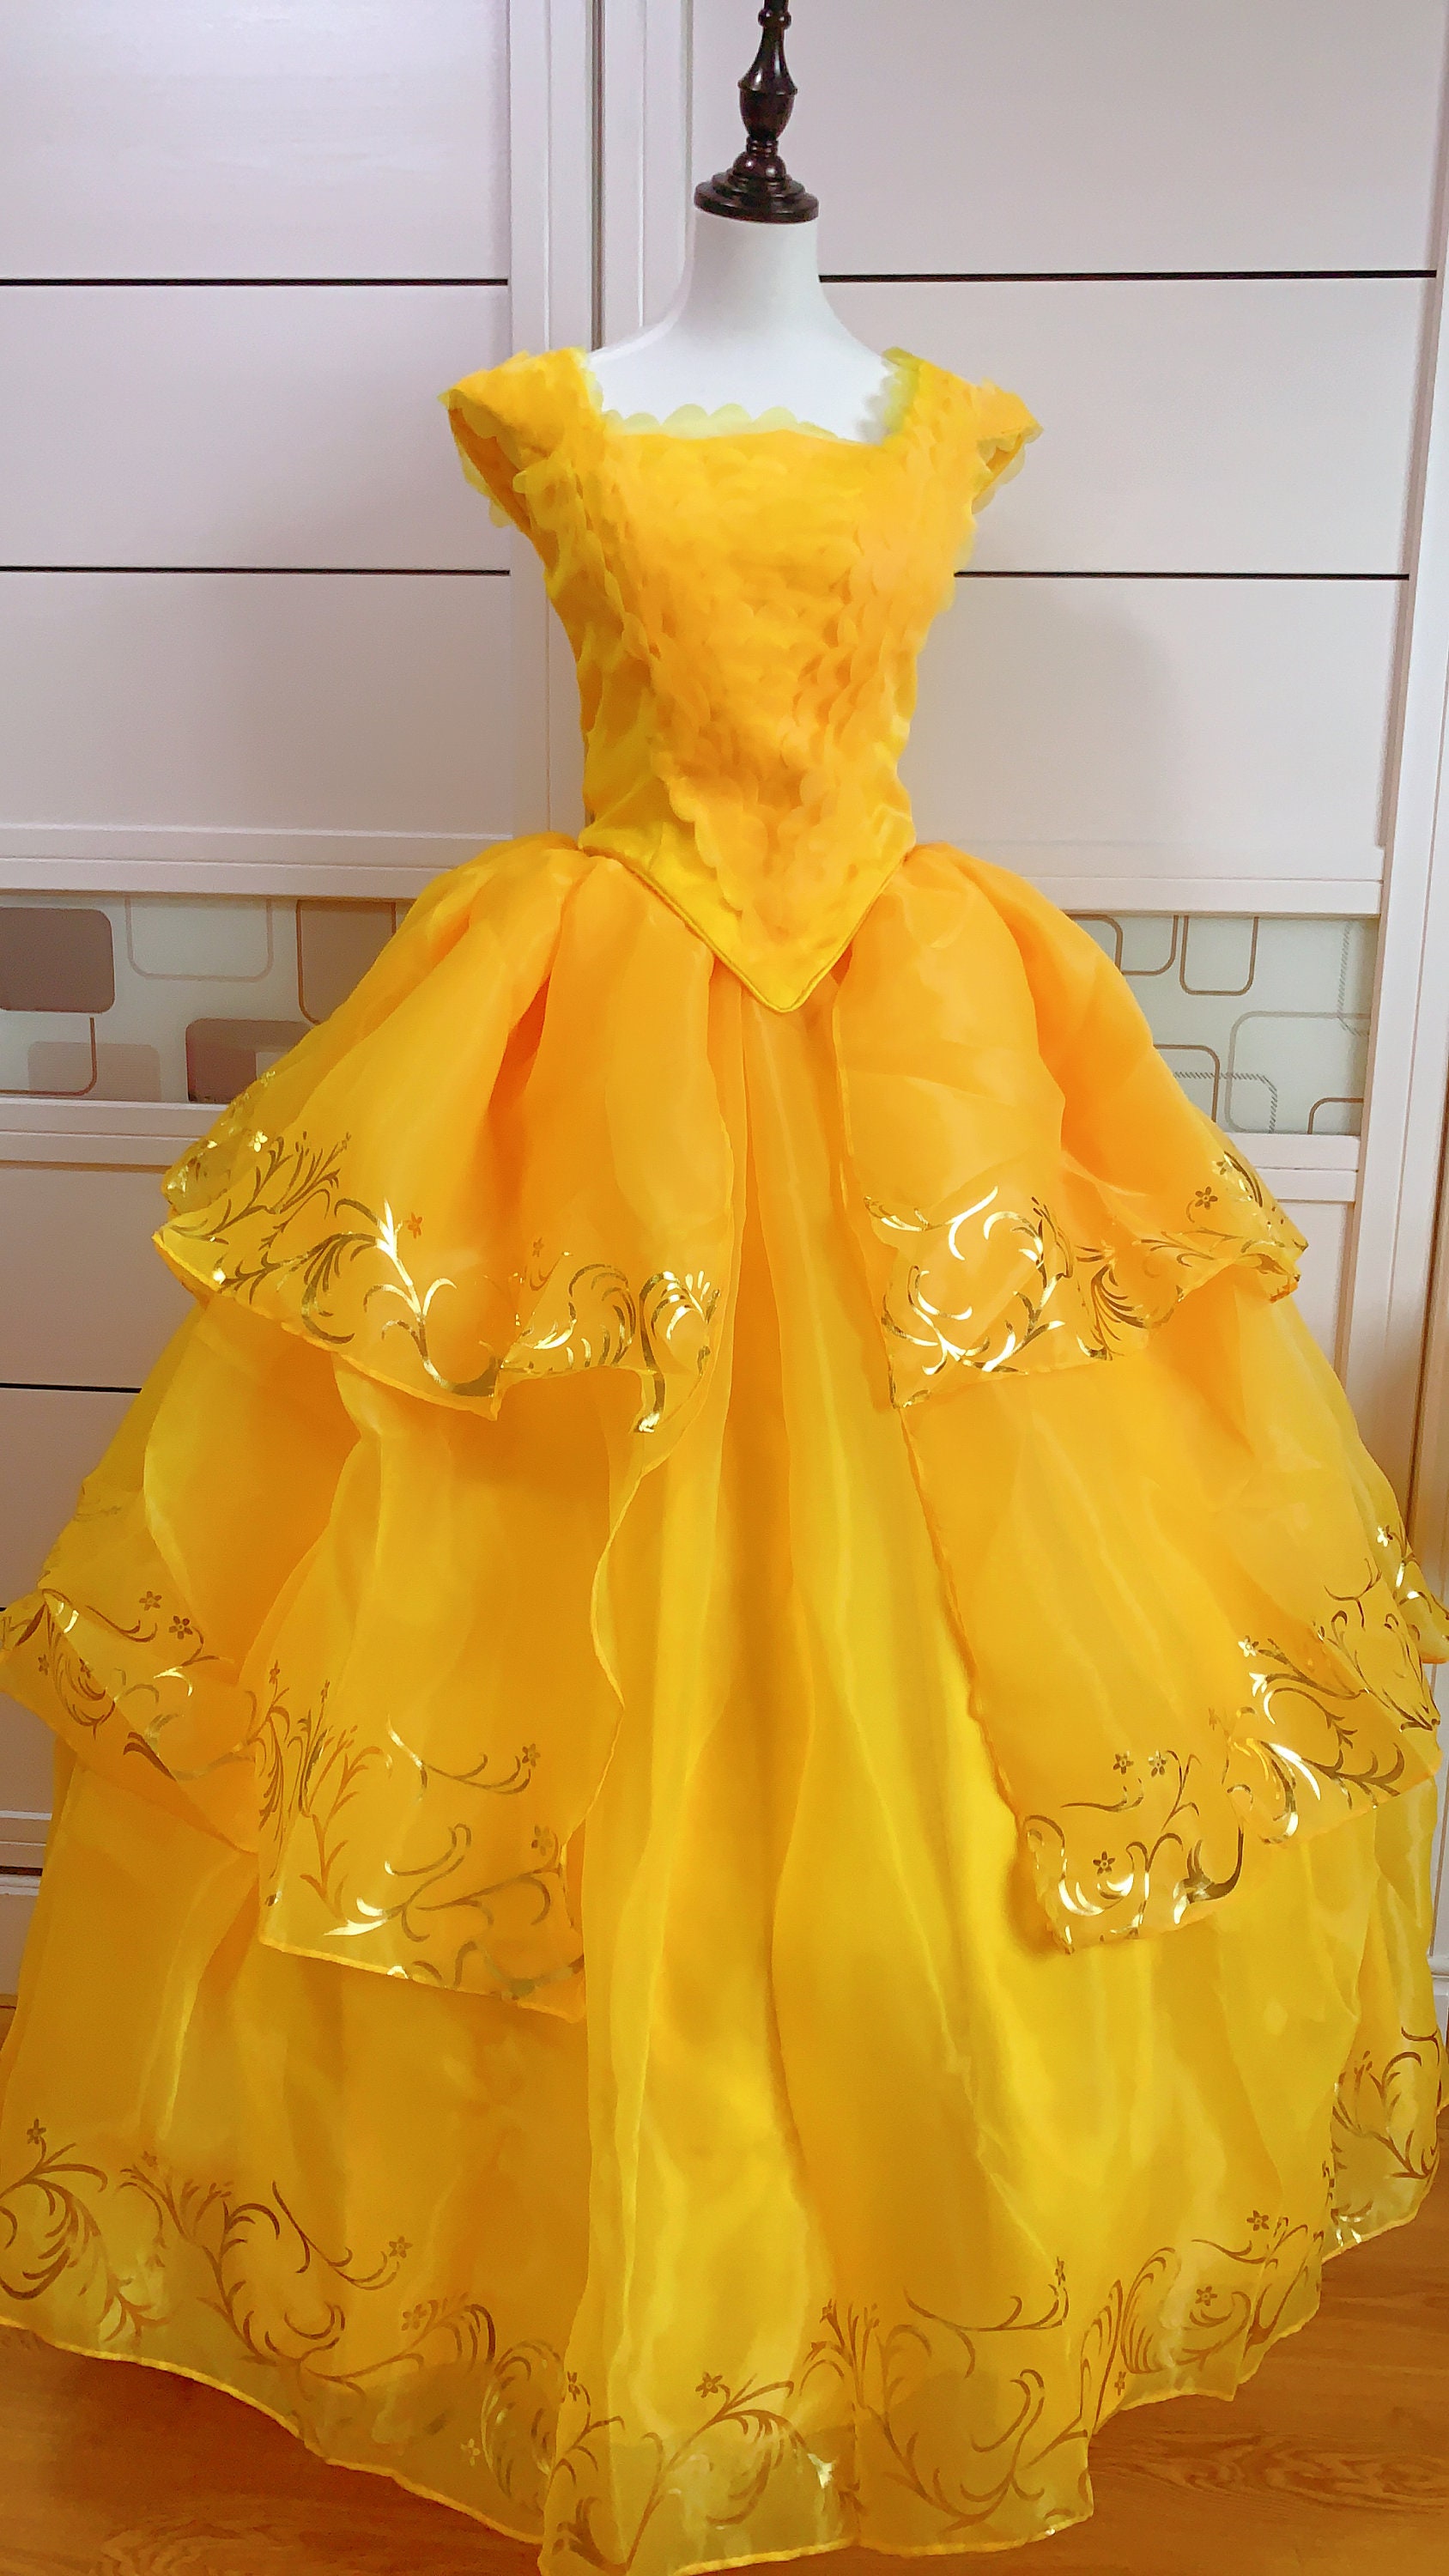 Inspired Belle Dress Belle Cosplay Costume 2017 Moive Beauty and the ...